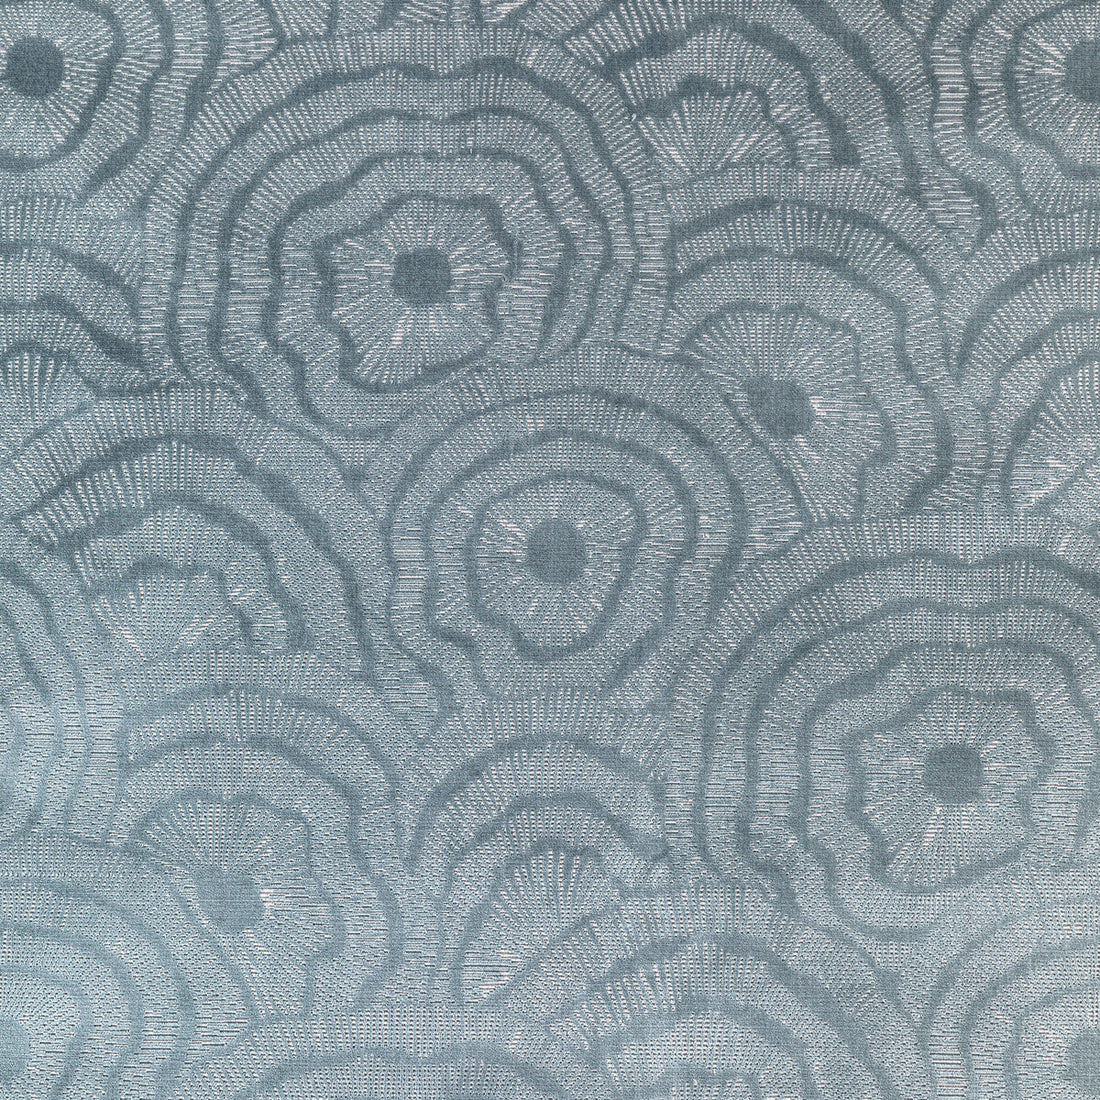 Panache Velvet fabric in chambray color - pattern 36366.5.0 - by Kravet Couture in the Corey Damen Jenkins Trad Nouveau collection